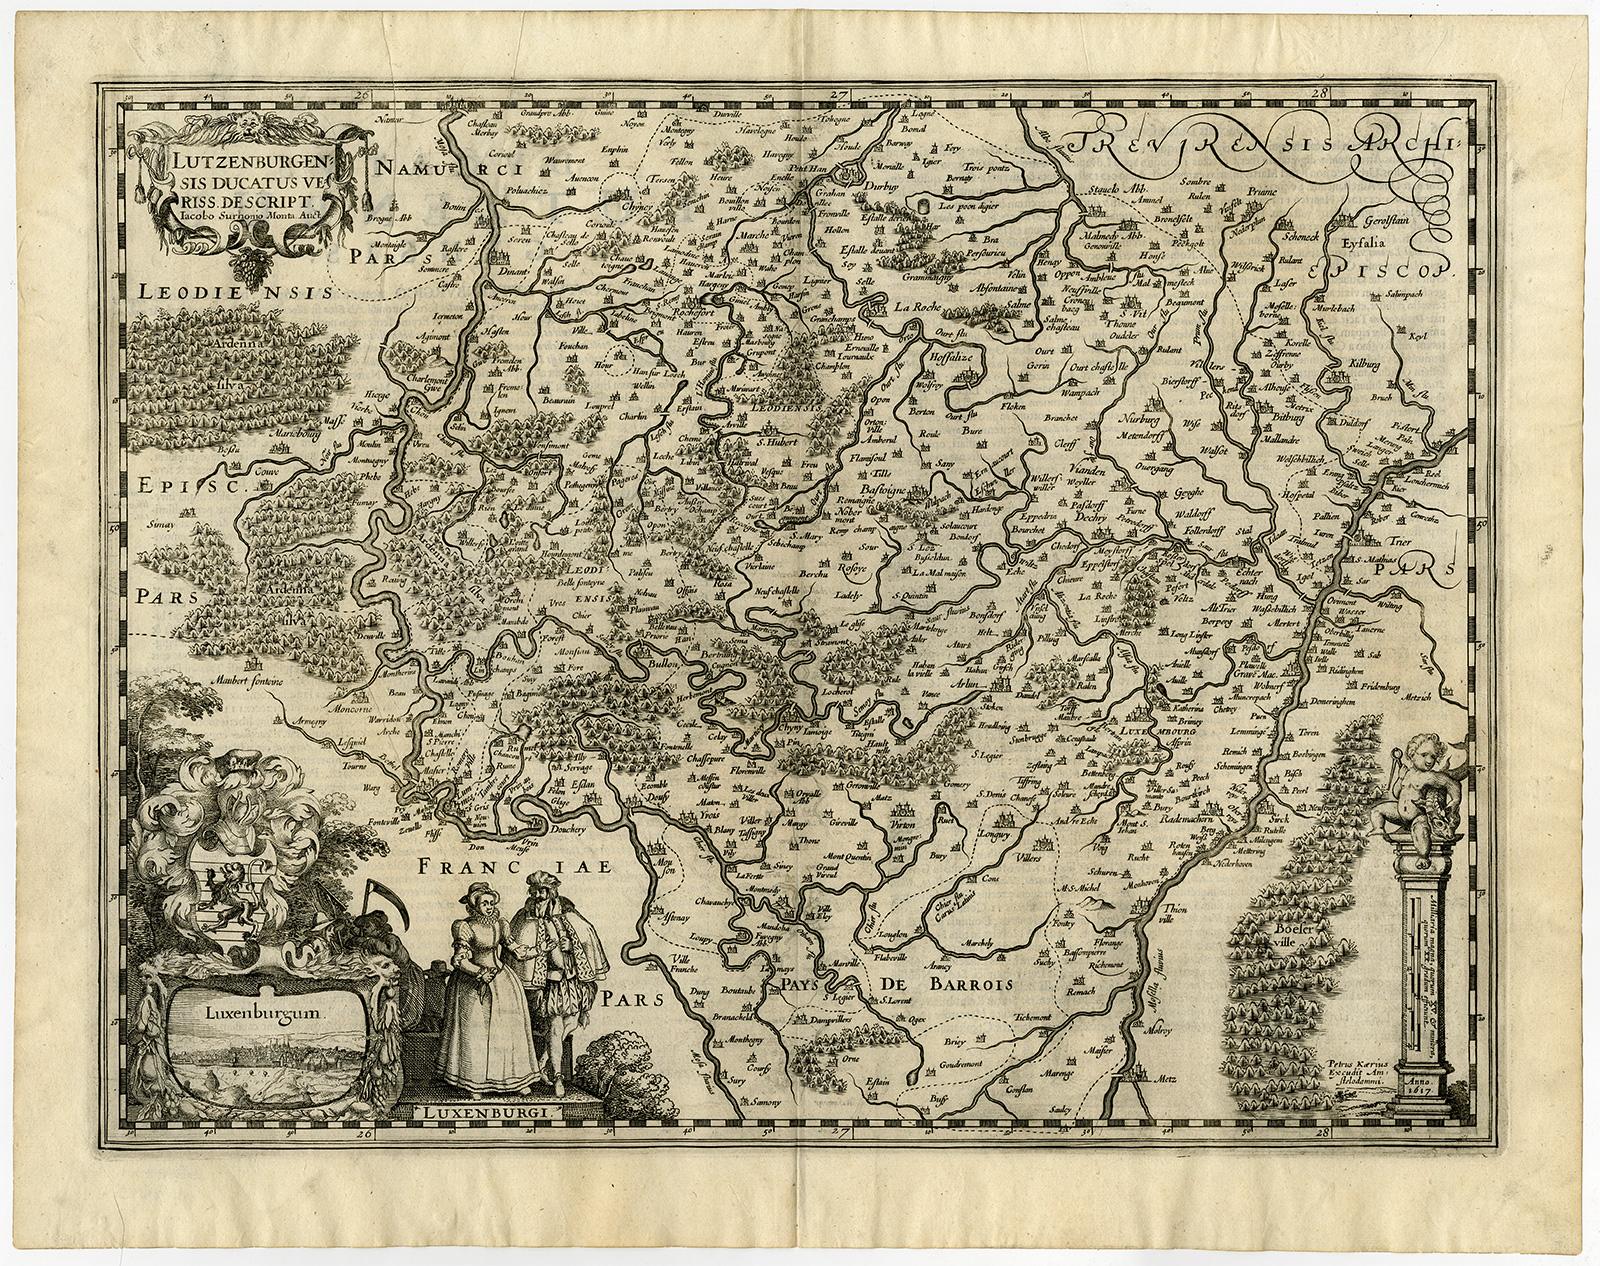 Antique map of Luxembourg and its region by Kaerius - Engraving - 17th c. - Print by Pieter van den Keere